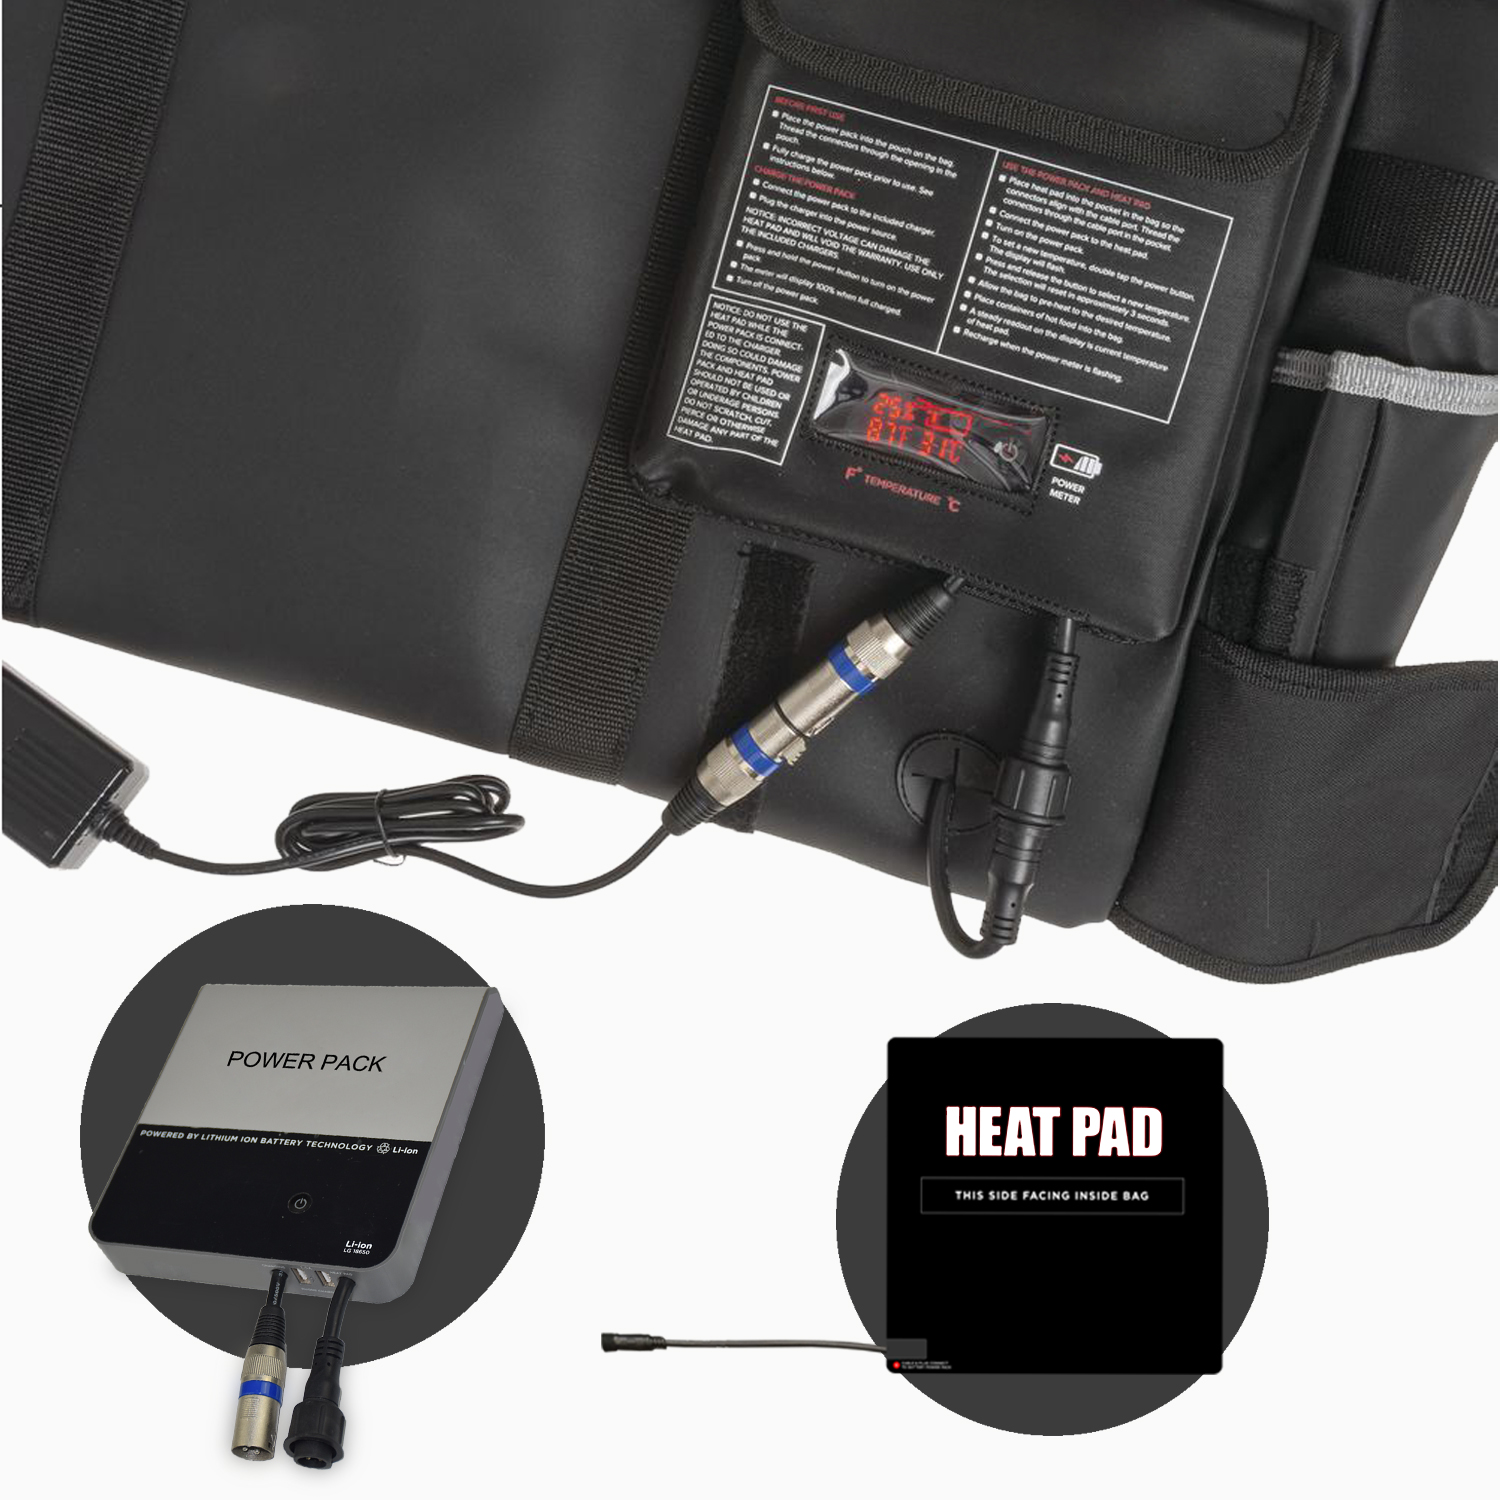 heated delivery bag